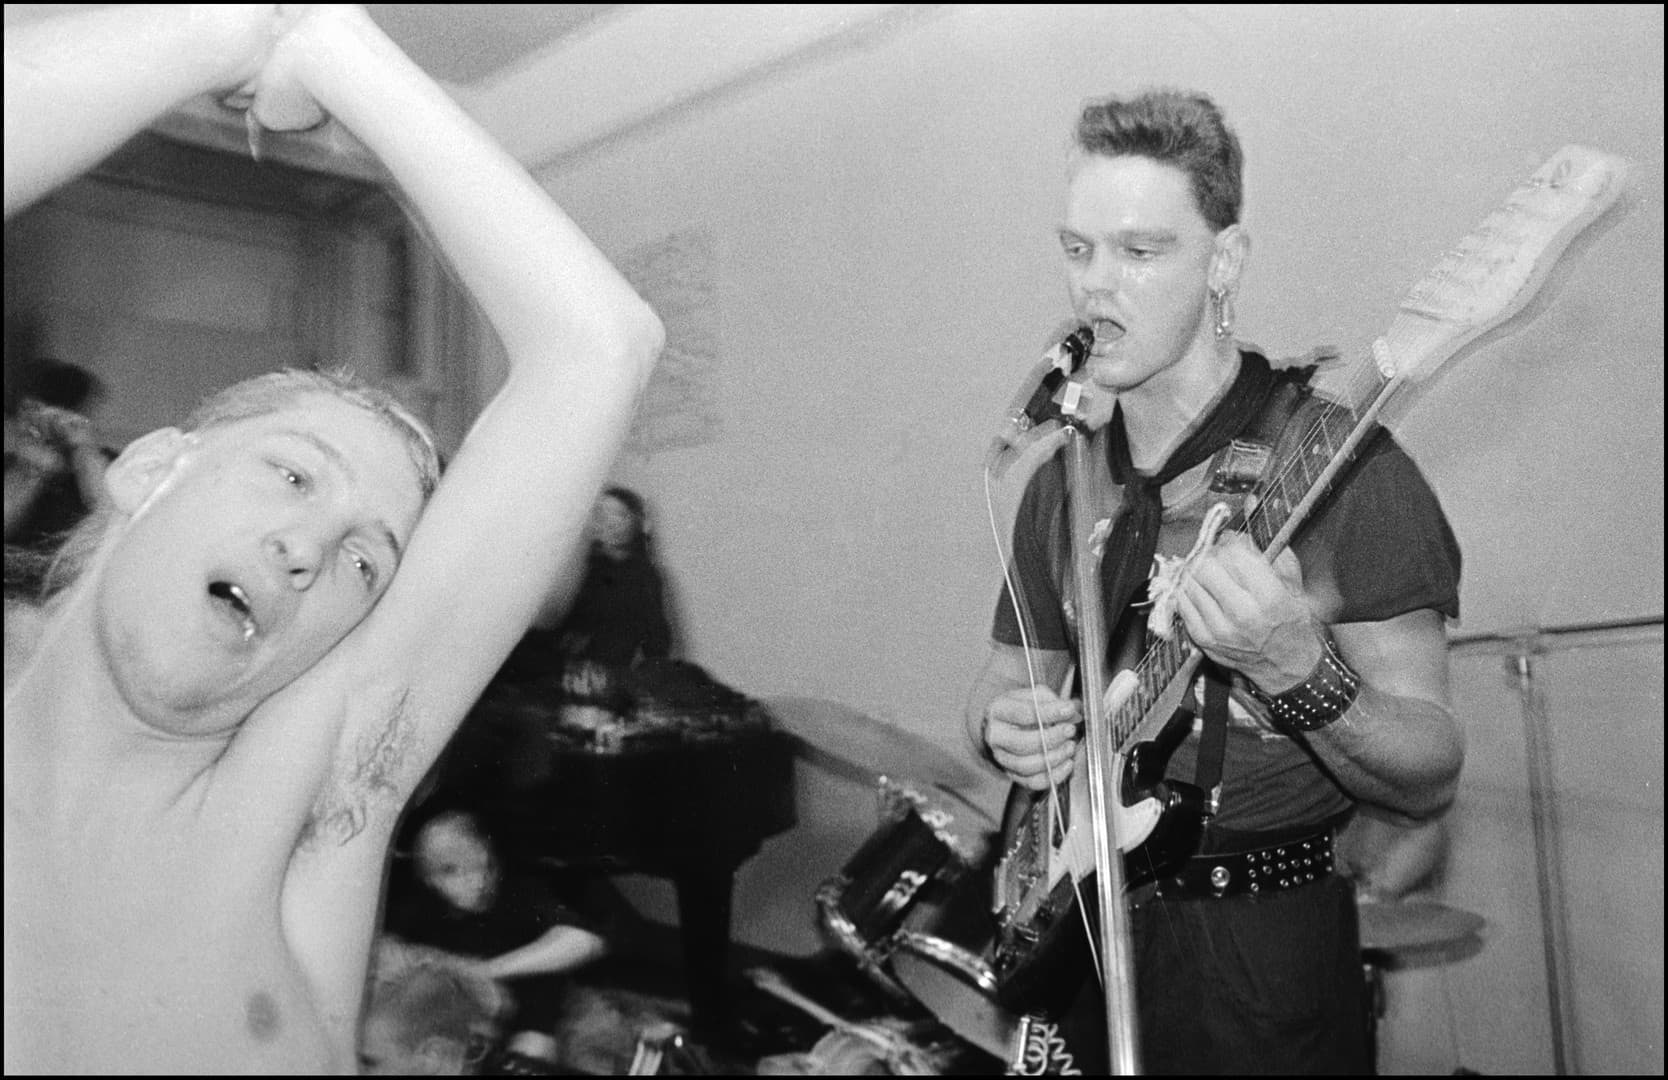 Punkrock concert in a church hall of the protestant church, Karl-Marx-Stadt, Saxony, 1985